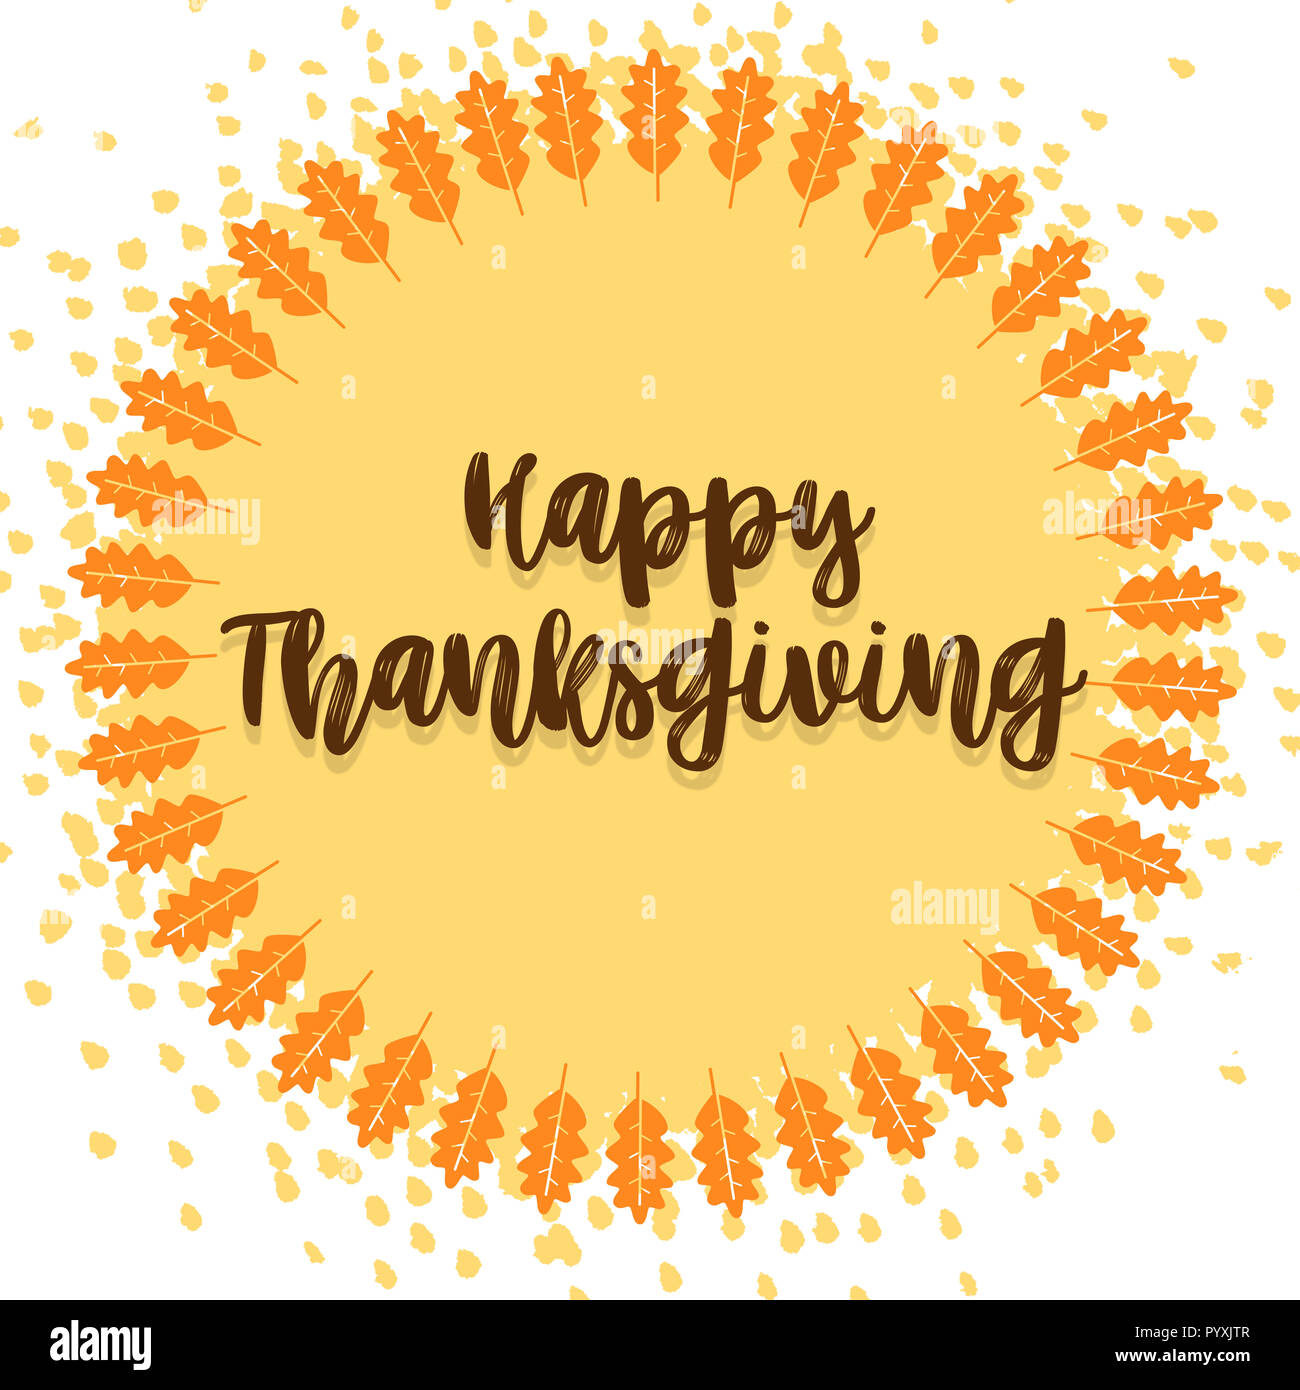 Happy Thanksgiving Typography Poster Celebration Text With Leaves